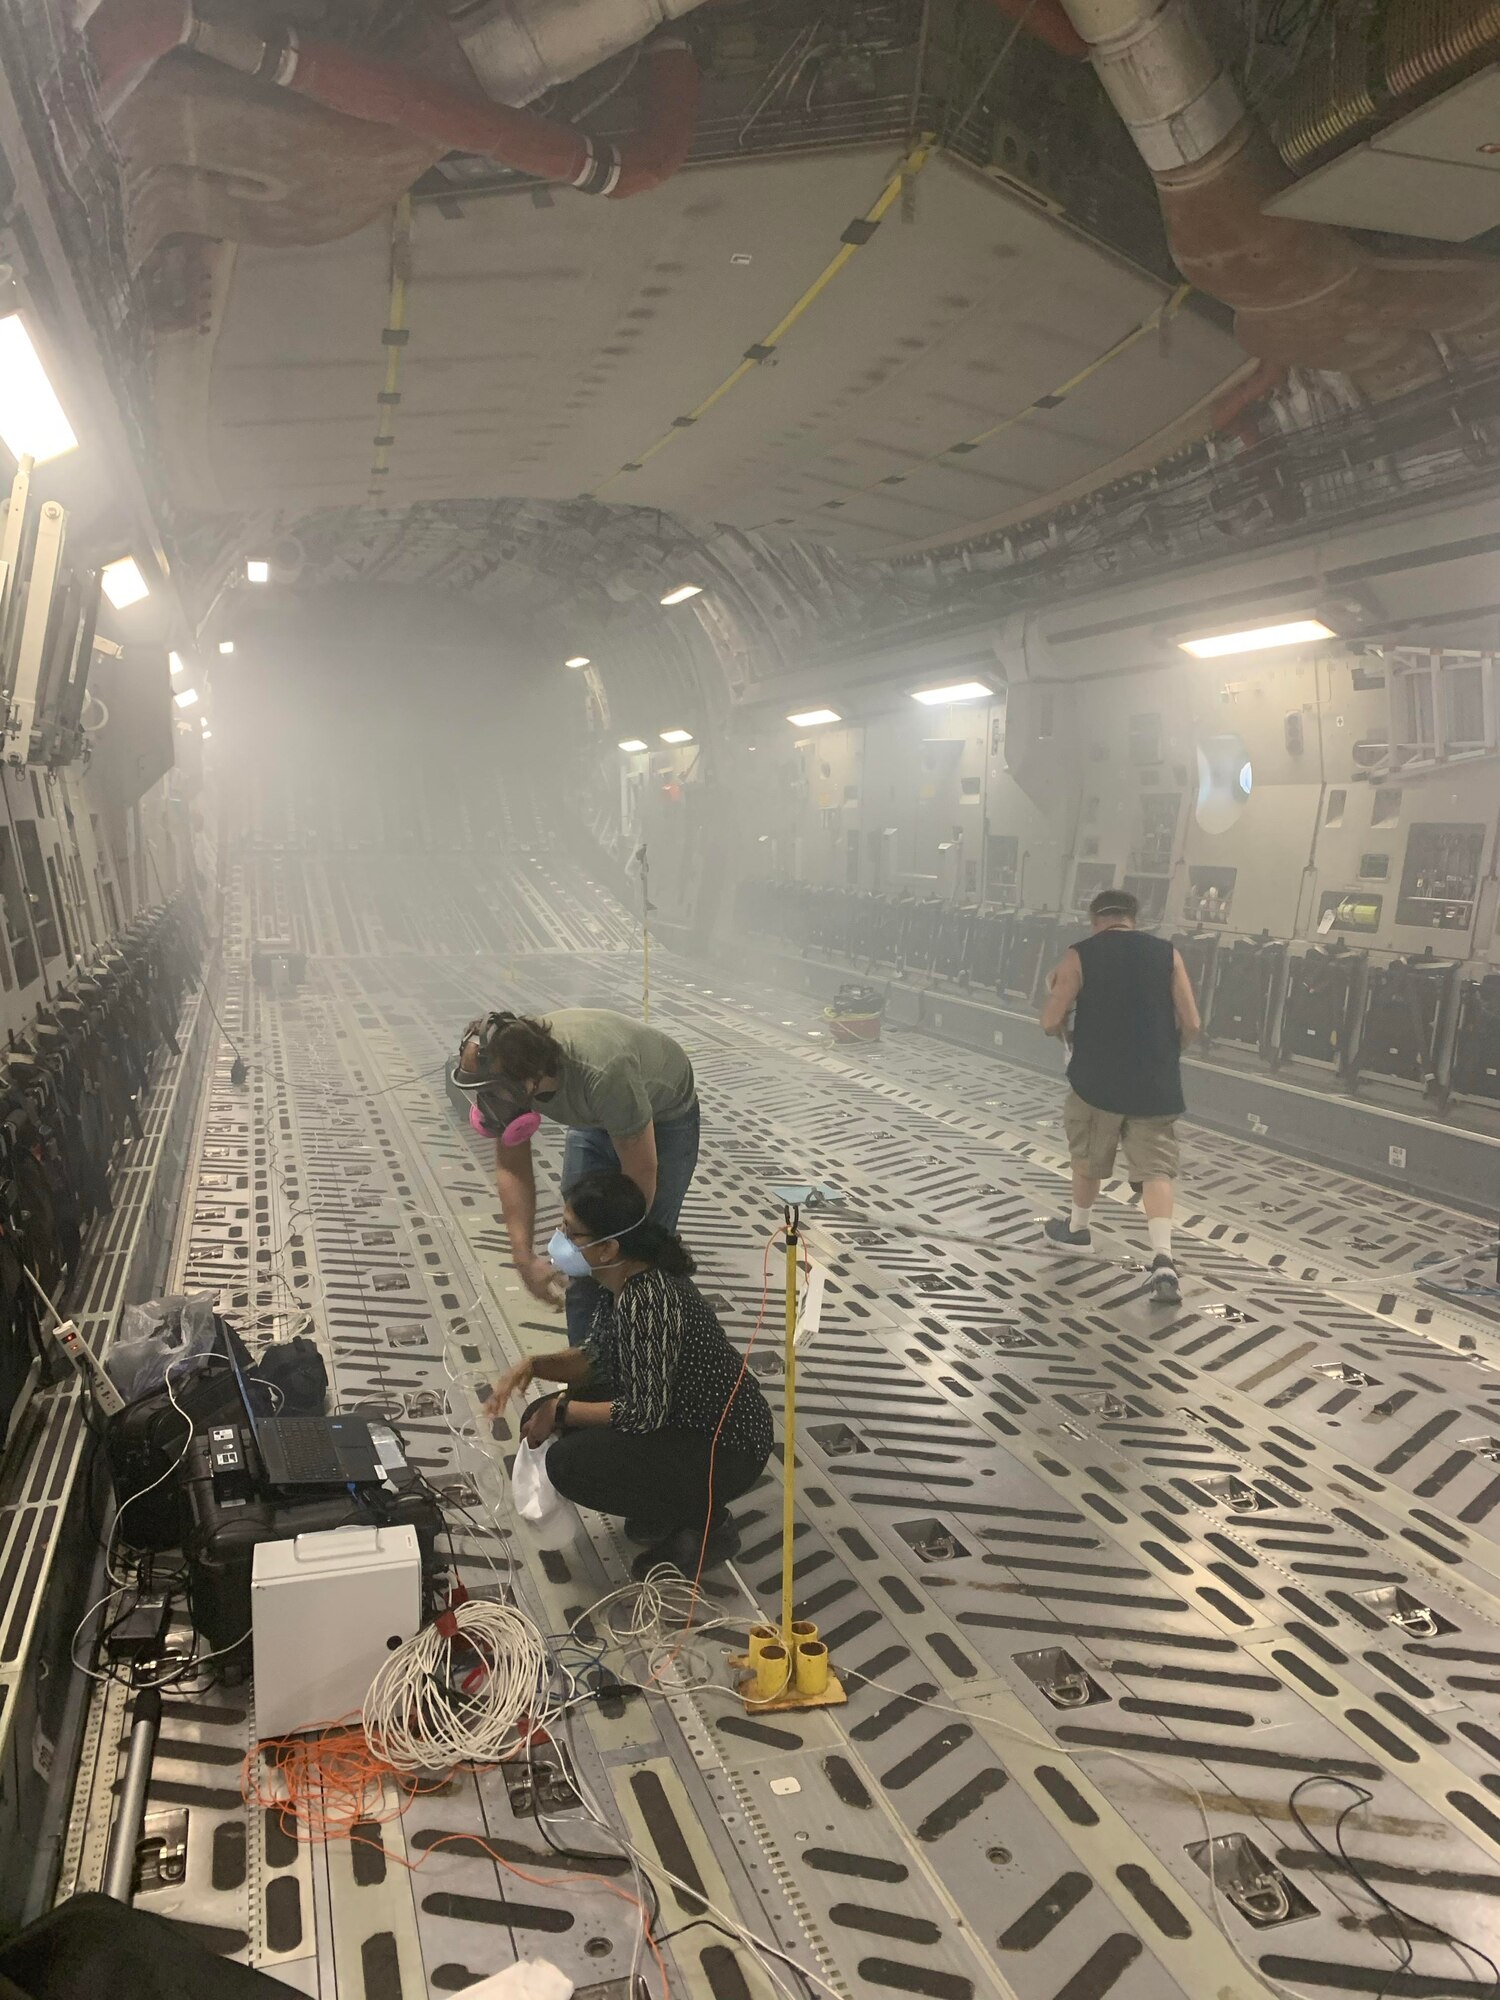 A team from the Air Force Life Cycle Management Center’s C-17 Program Office, 28th Test and Evaluation Squadron, and 437th Airlift Wing, conducted several interior airflow tests on a C-17 at Joint Base Charleston, S.C. March 26-30. The tests were designed to collect data and gather information to characterize the C-17’s airflow and ventilation patterns. (Courtesy photo)